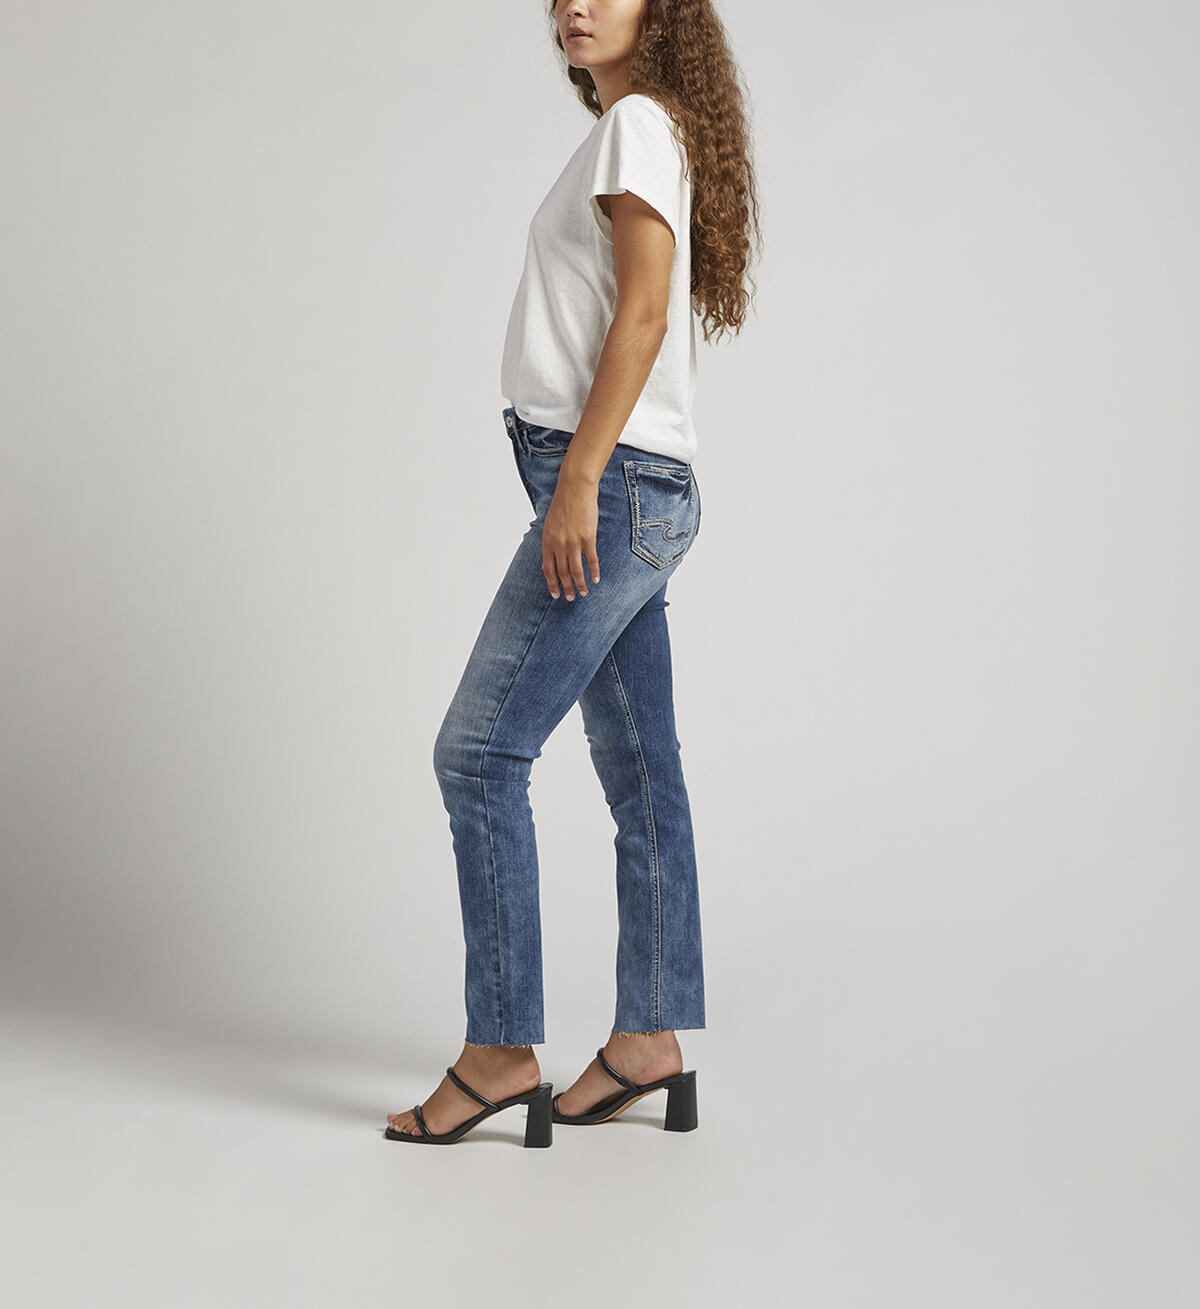 Hello Legs High Rise Slim Straight Jeans, , hi-res image number 2